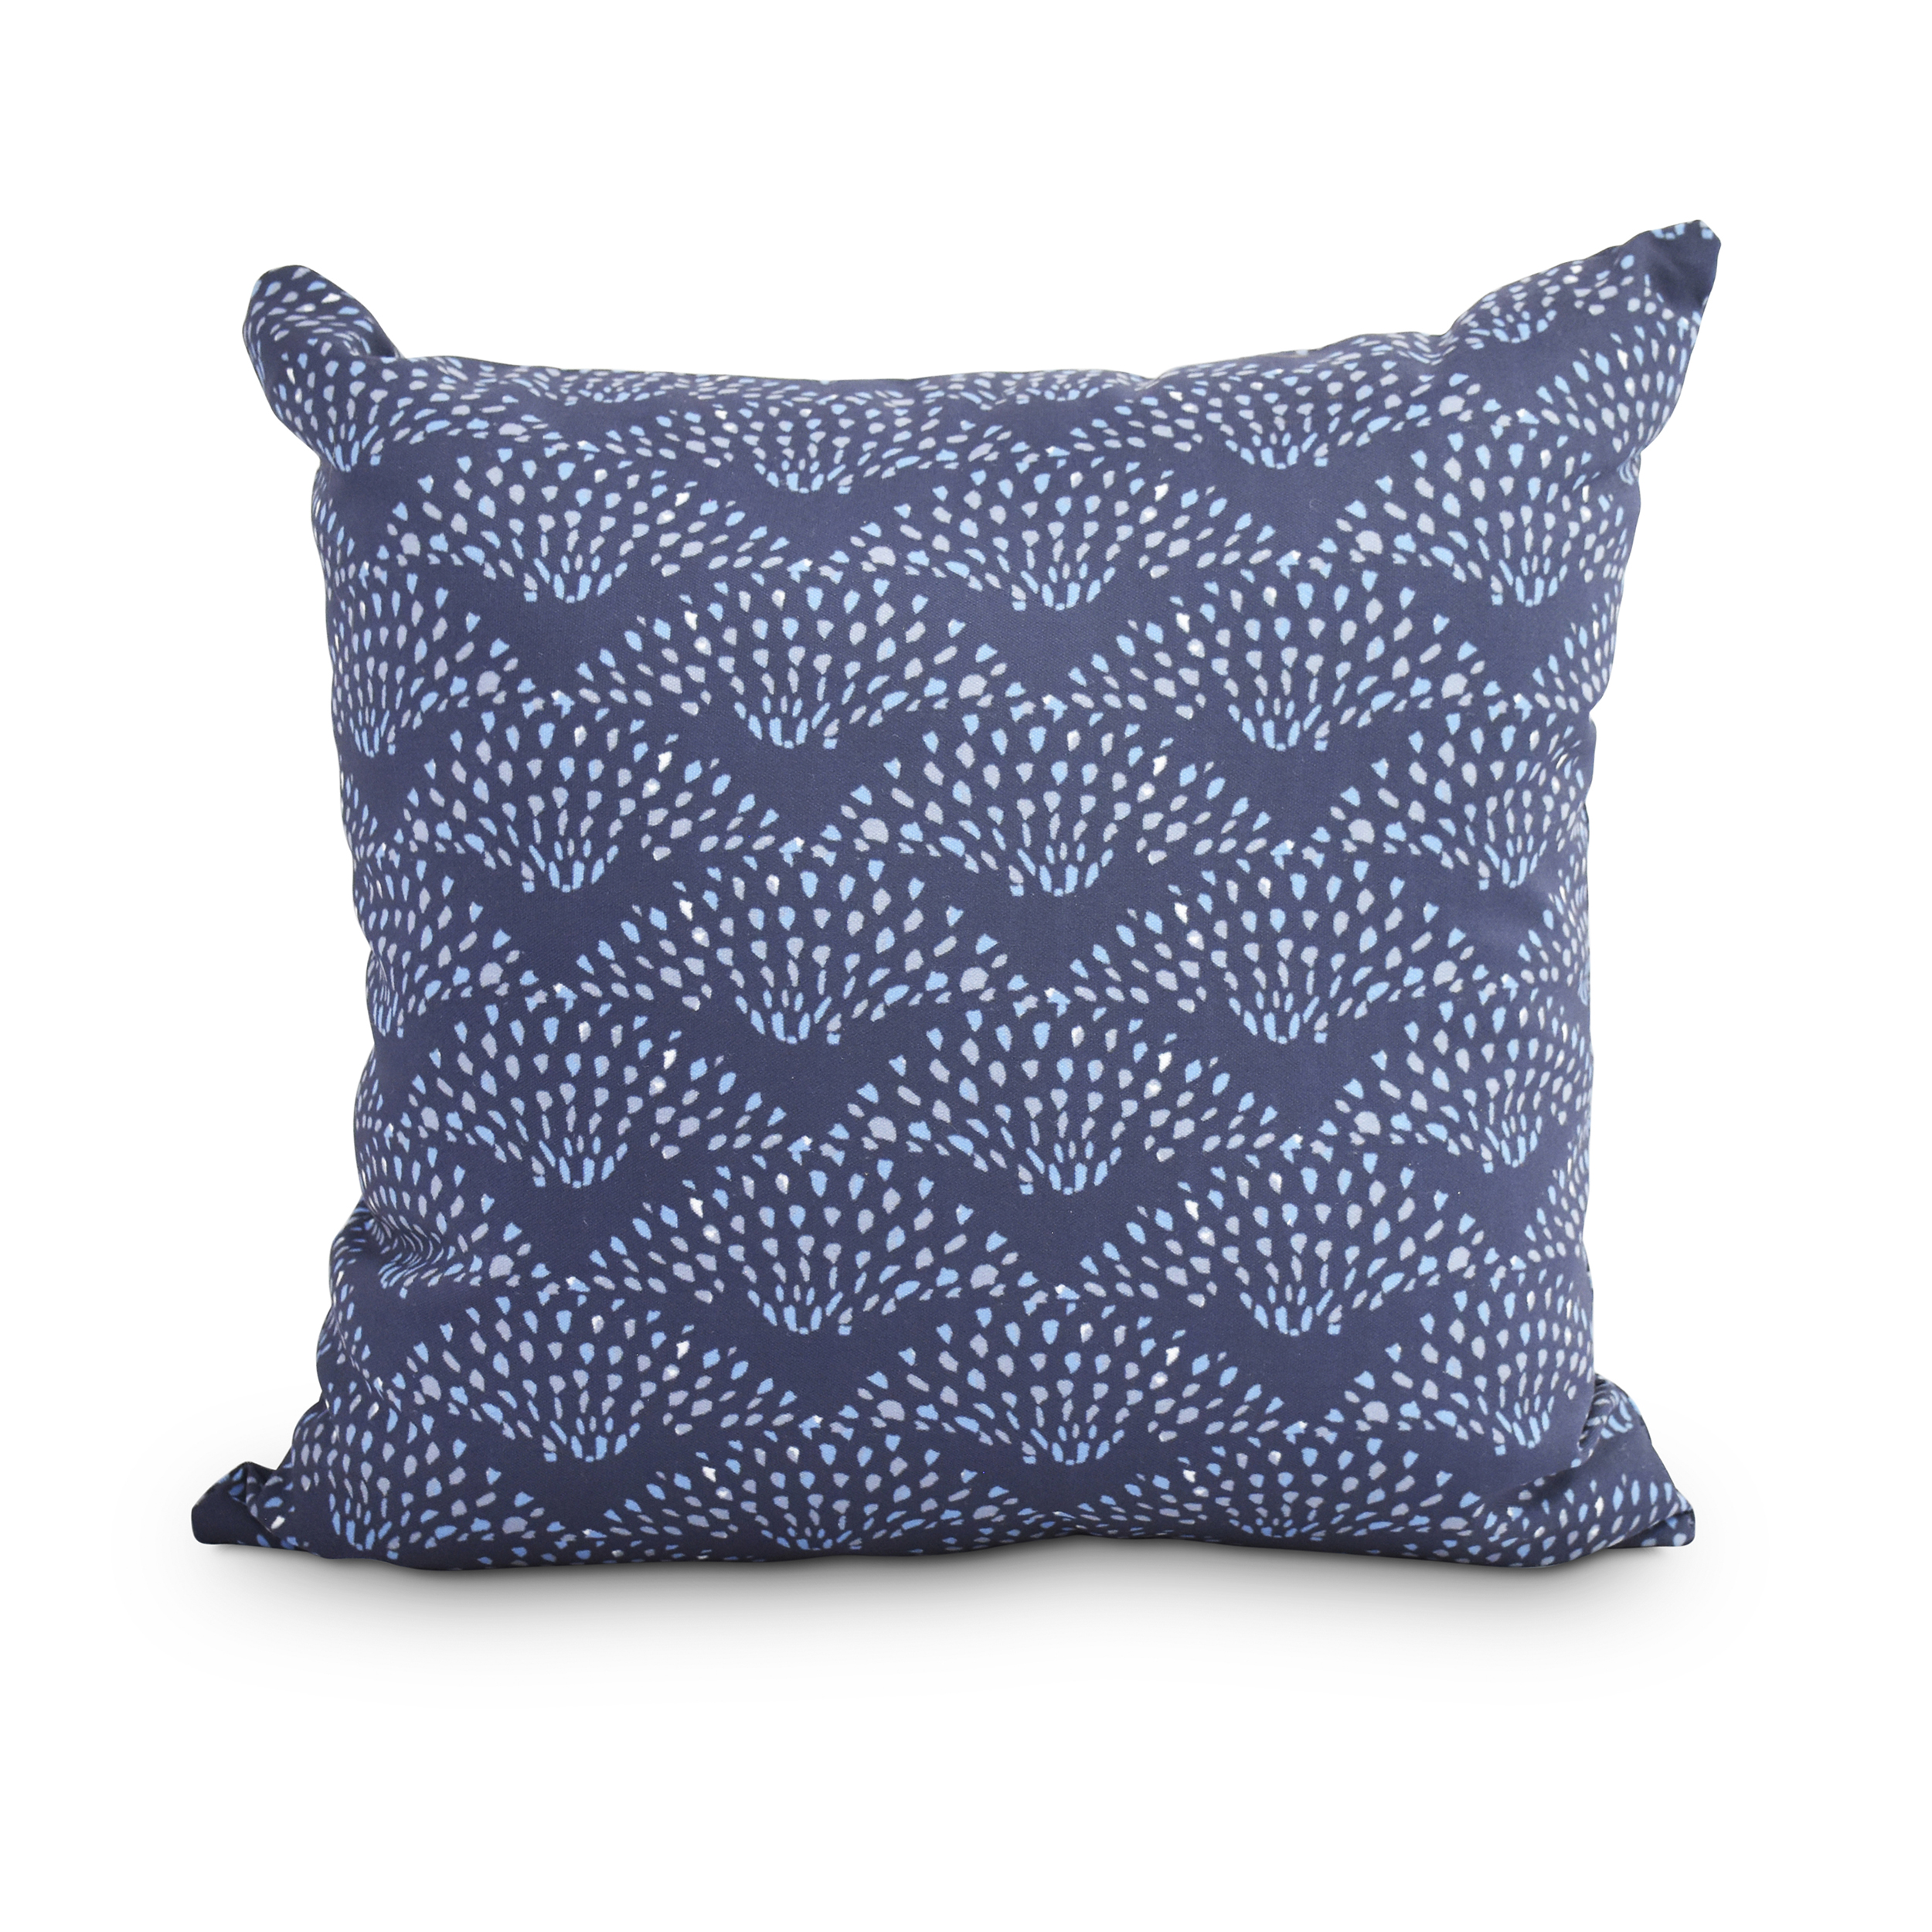 Simply Daisy, 16" x 16" Fan Dance Blue Geometric Print Decorative Outdoor Throw Pillow - image 1 of 2